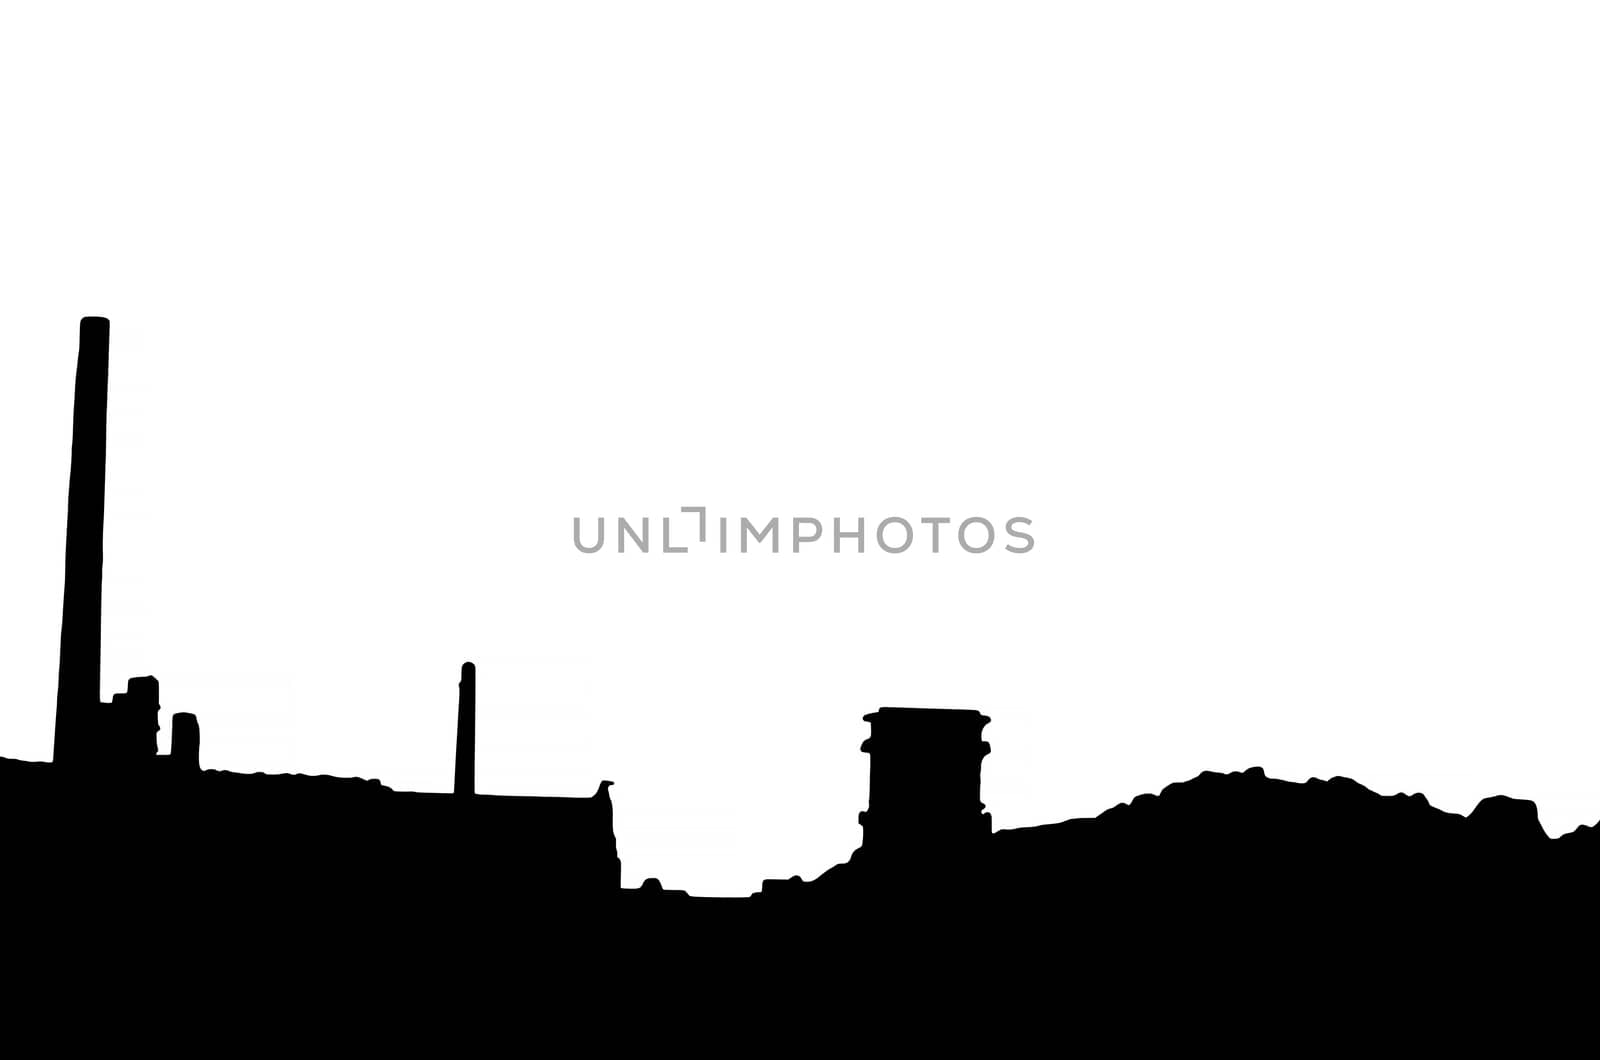 Silhouette of an old factory building with chimneys against white background.